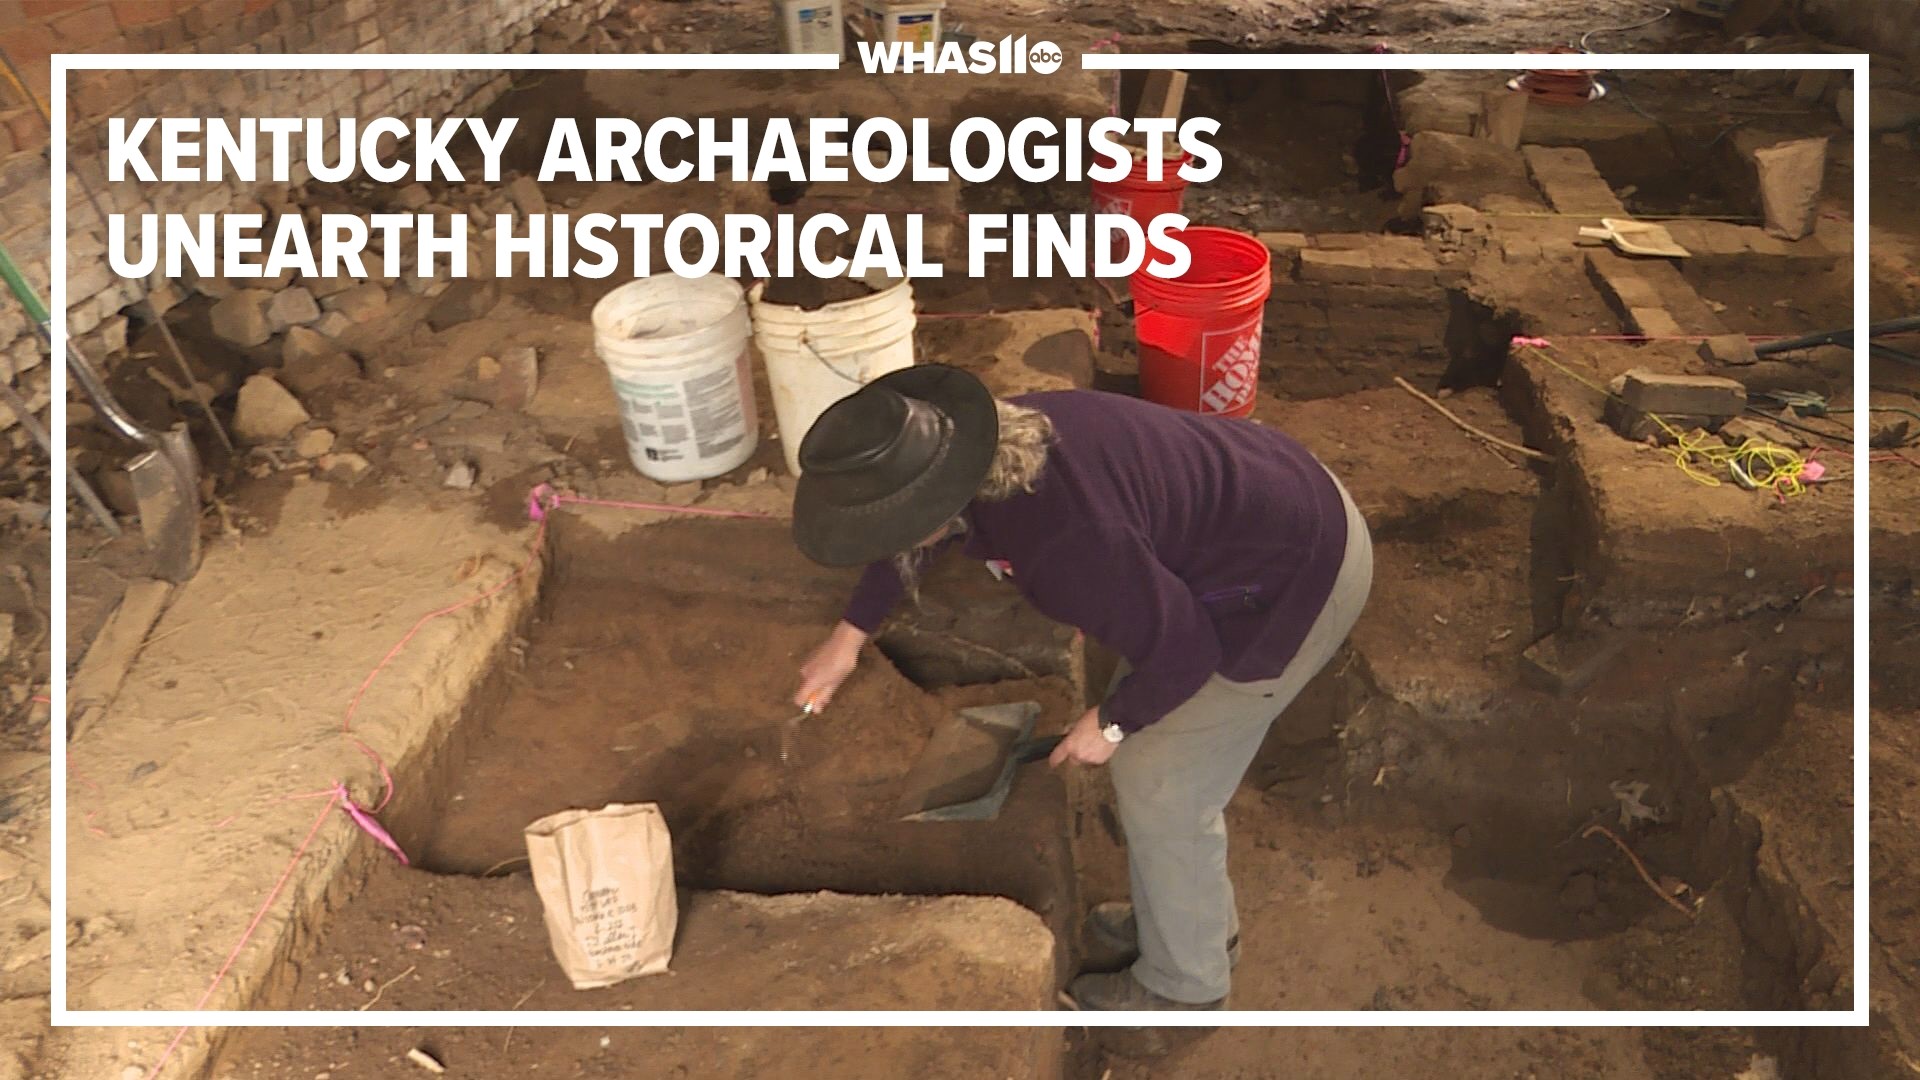 An archaeological dig on Louisville's oldest working farm is uncovering a Kentucky past you won't find in the history books.